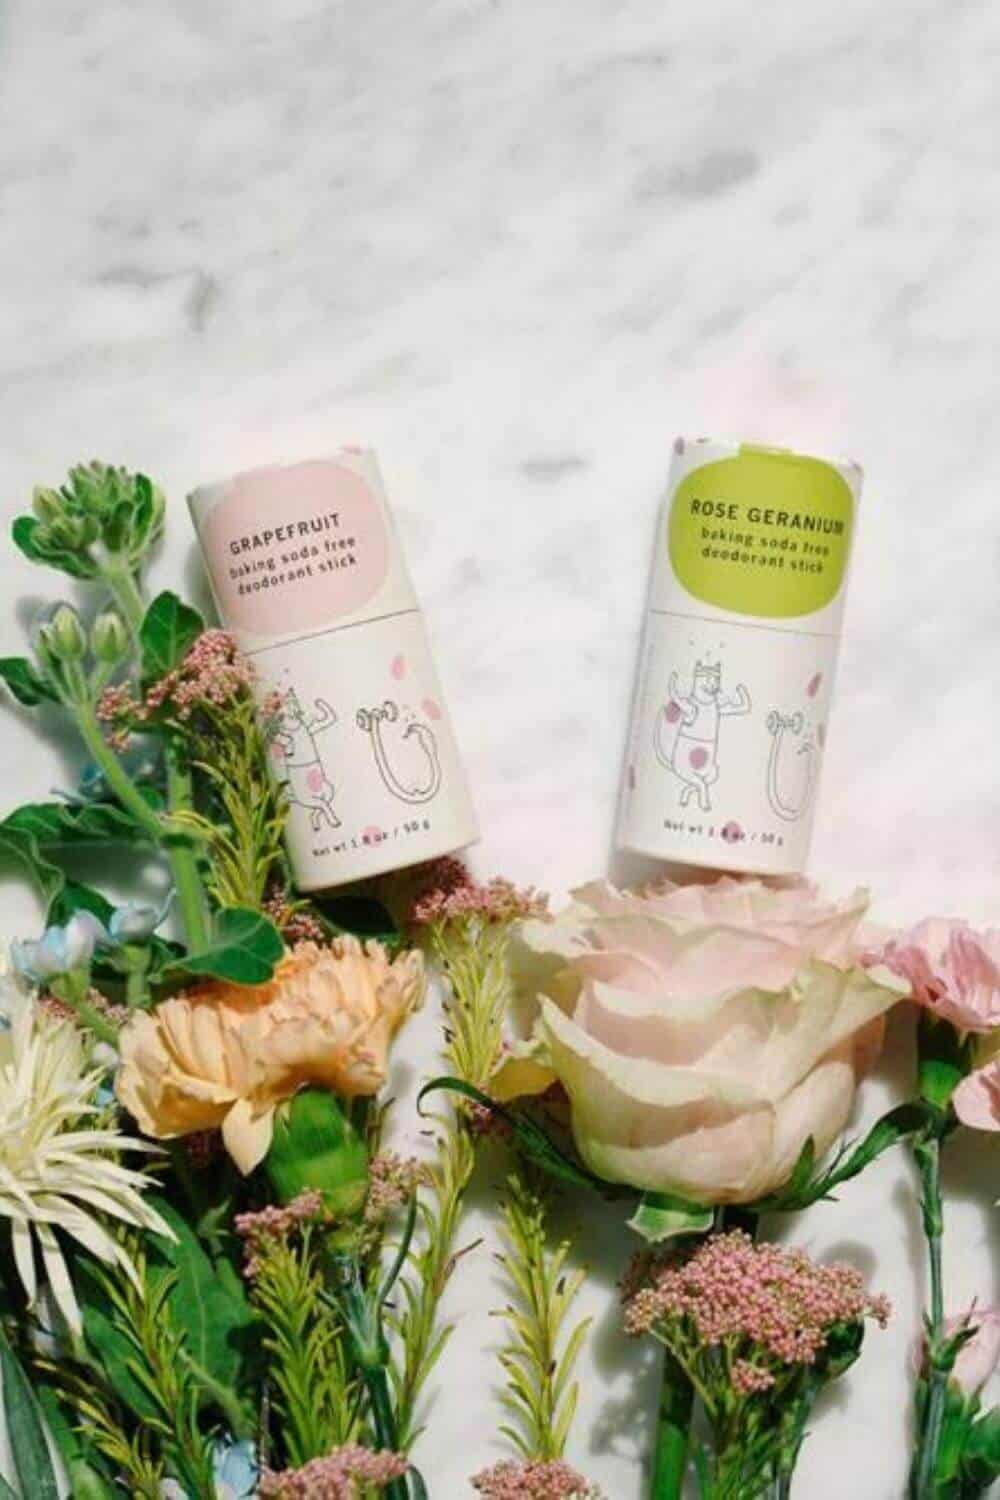 The ethical personal care market has exploded with options in the last few years which is great. The problem though, is trying to find eco friendly deodorants that are effective. So, we’ve made a list of our favorites that are fit for purpose! Image by Meow Meow Tweet #ecofriendlydeodorant #sustainablejungle